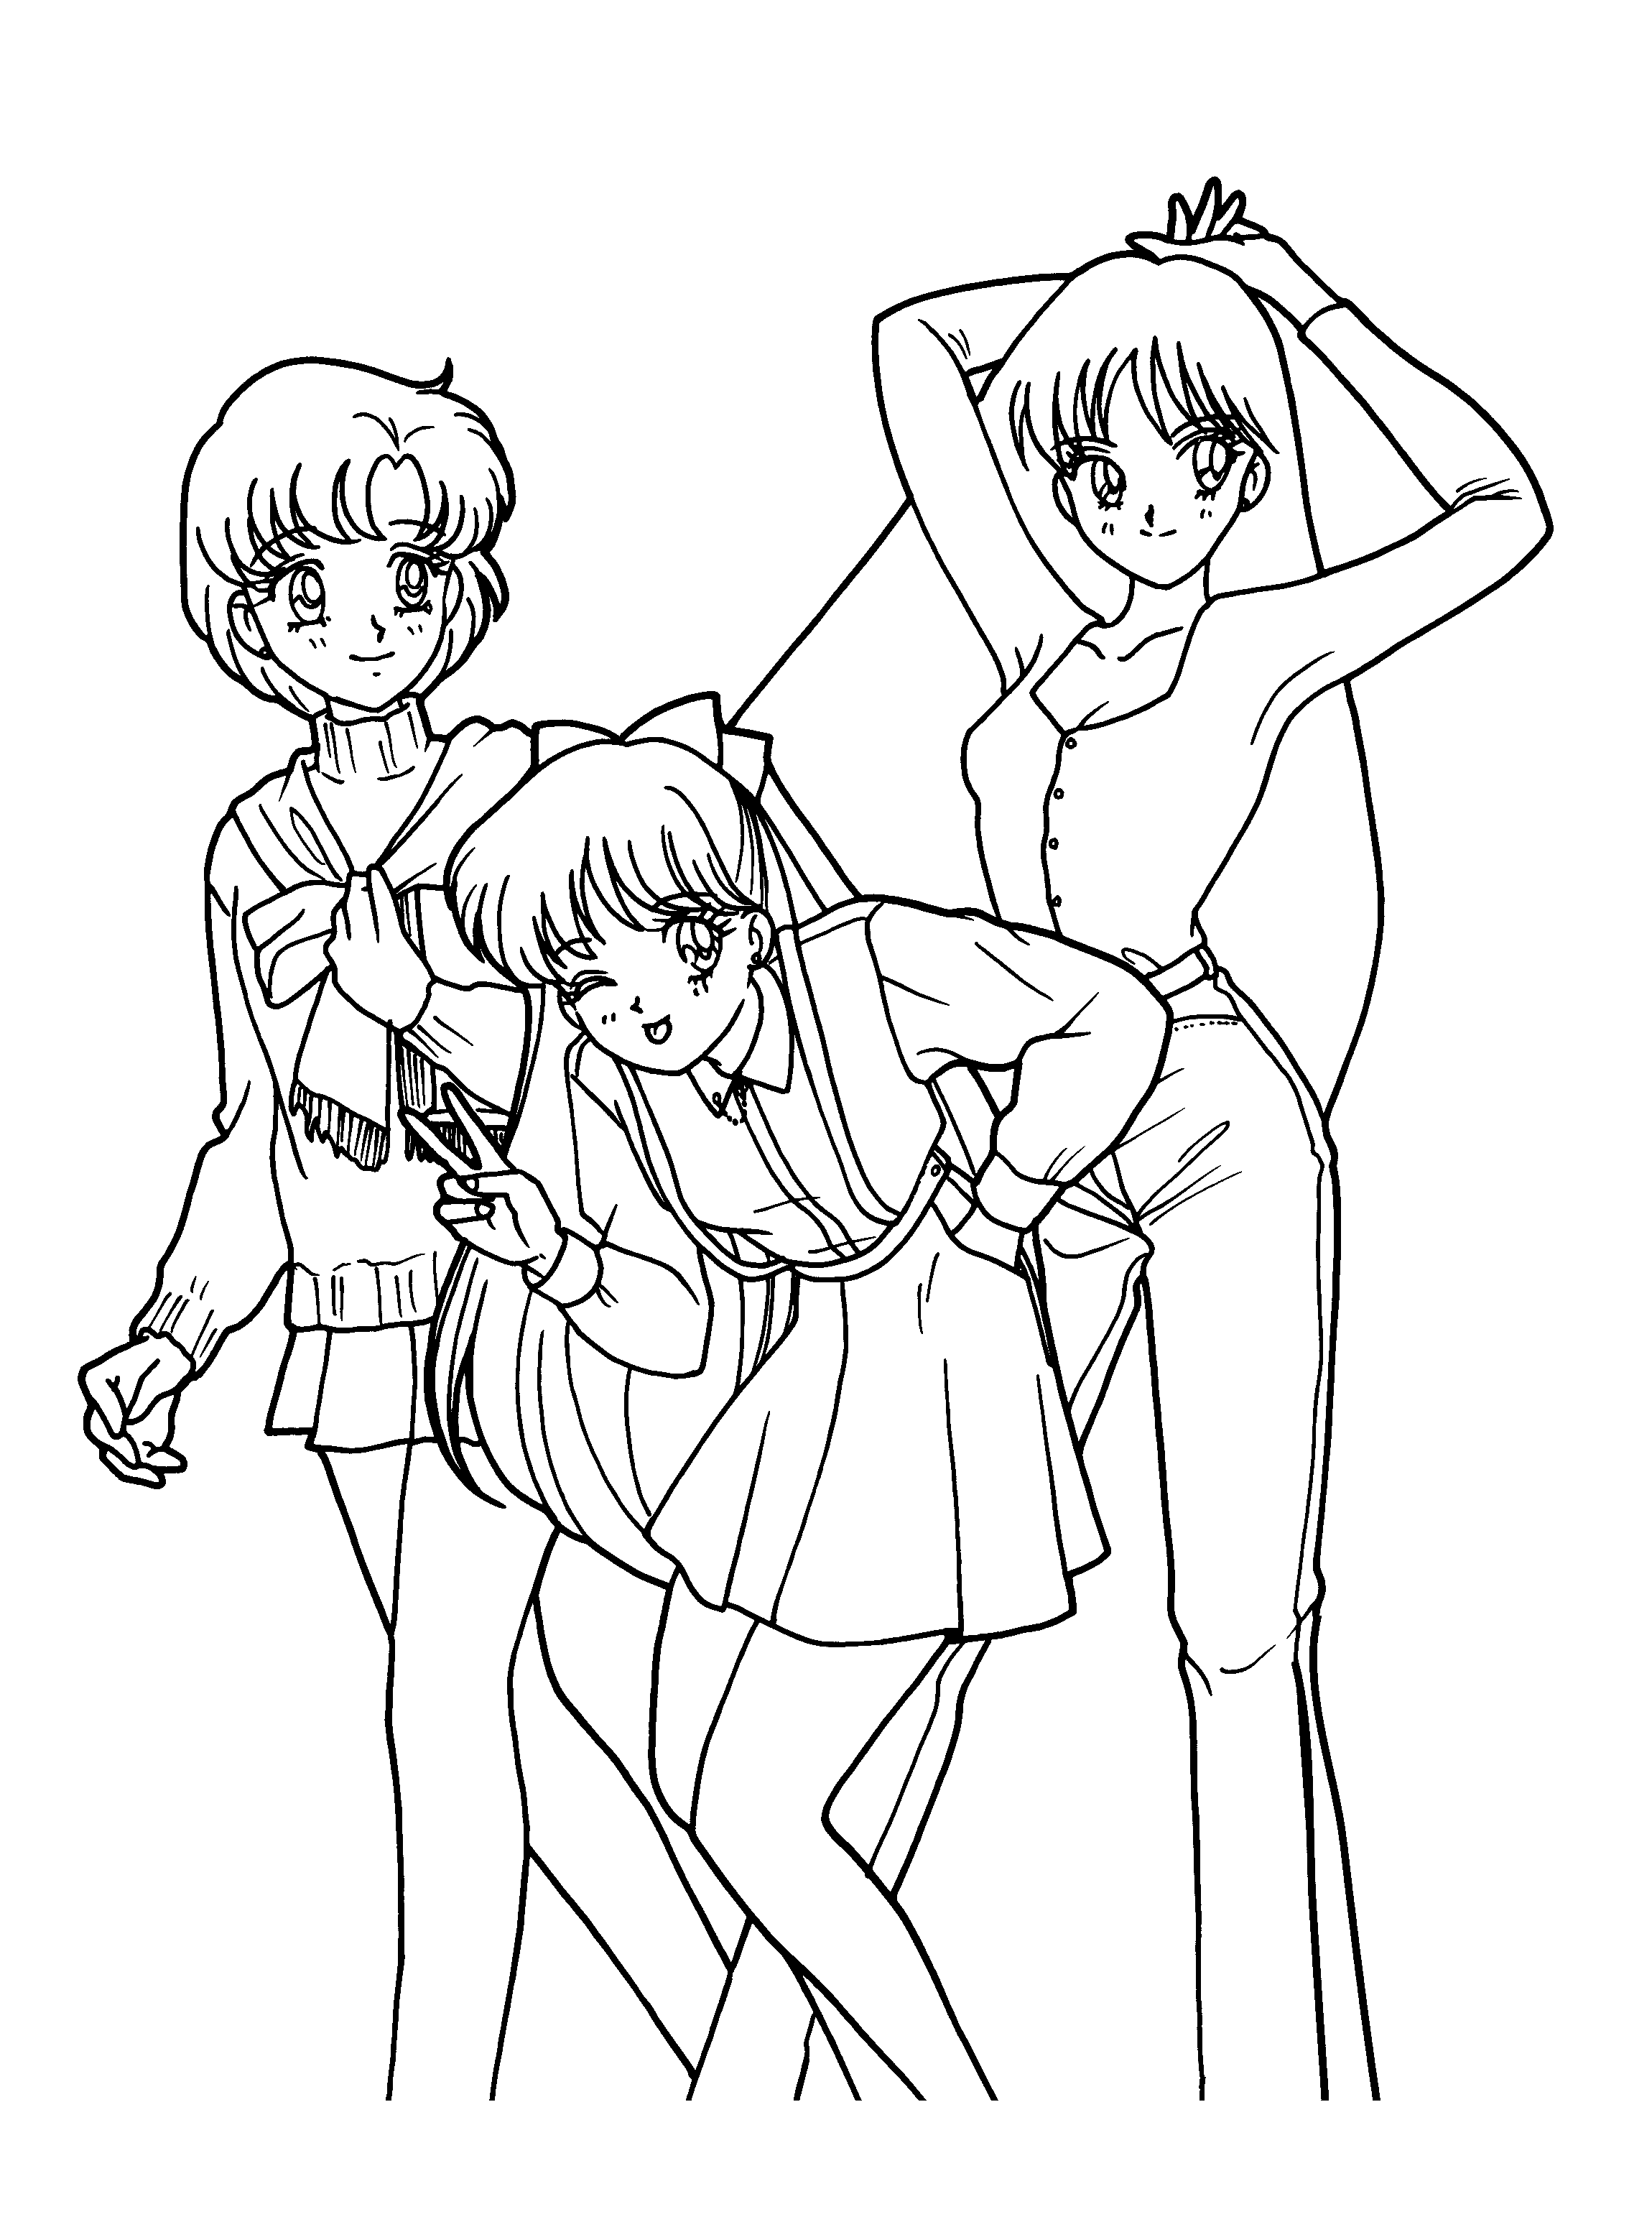 animated-coloring-pages-sailor-moon-image-0114